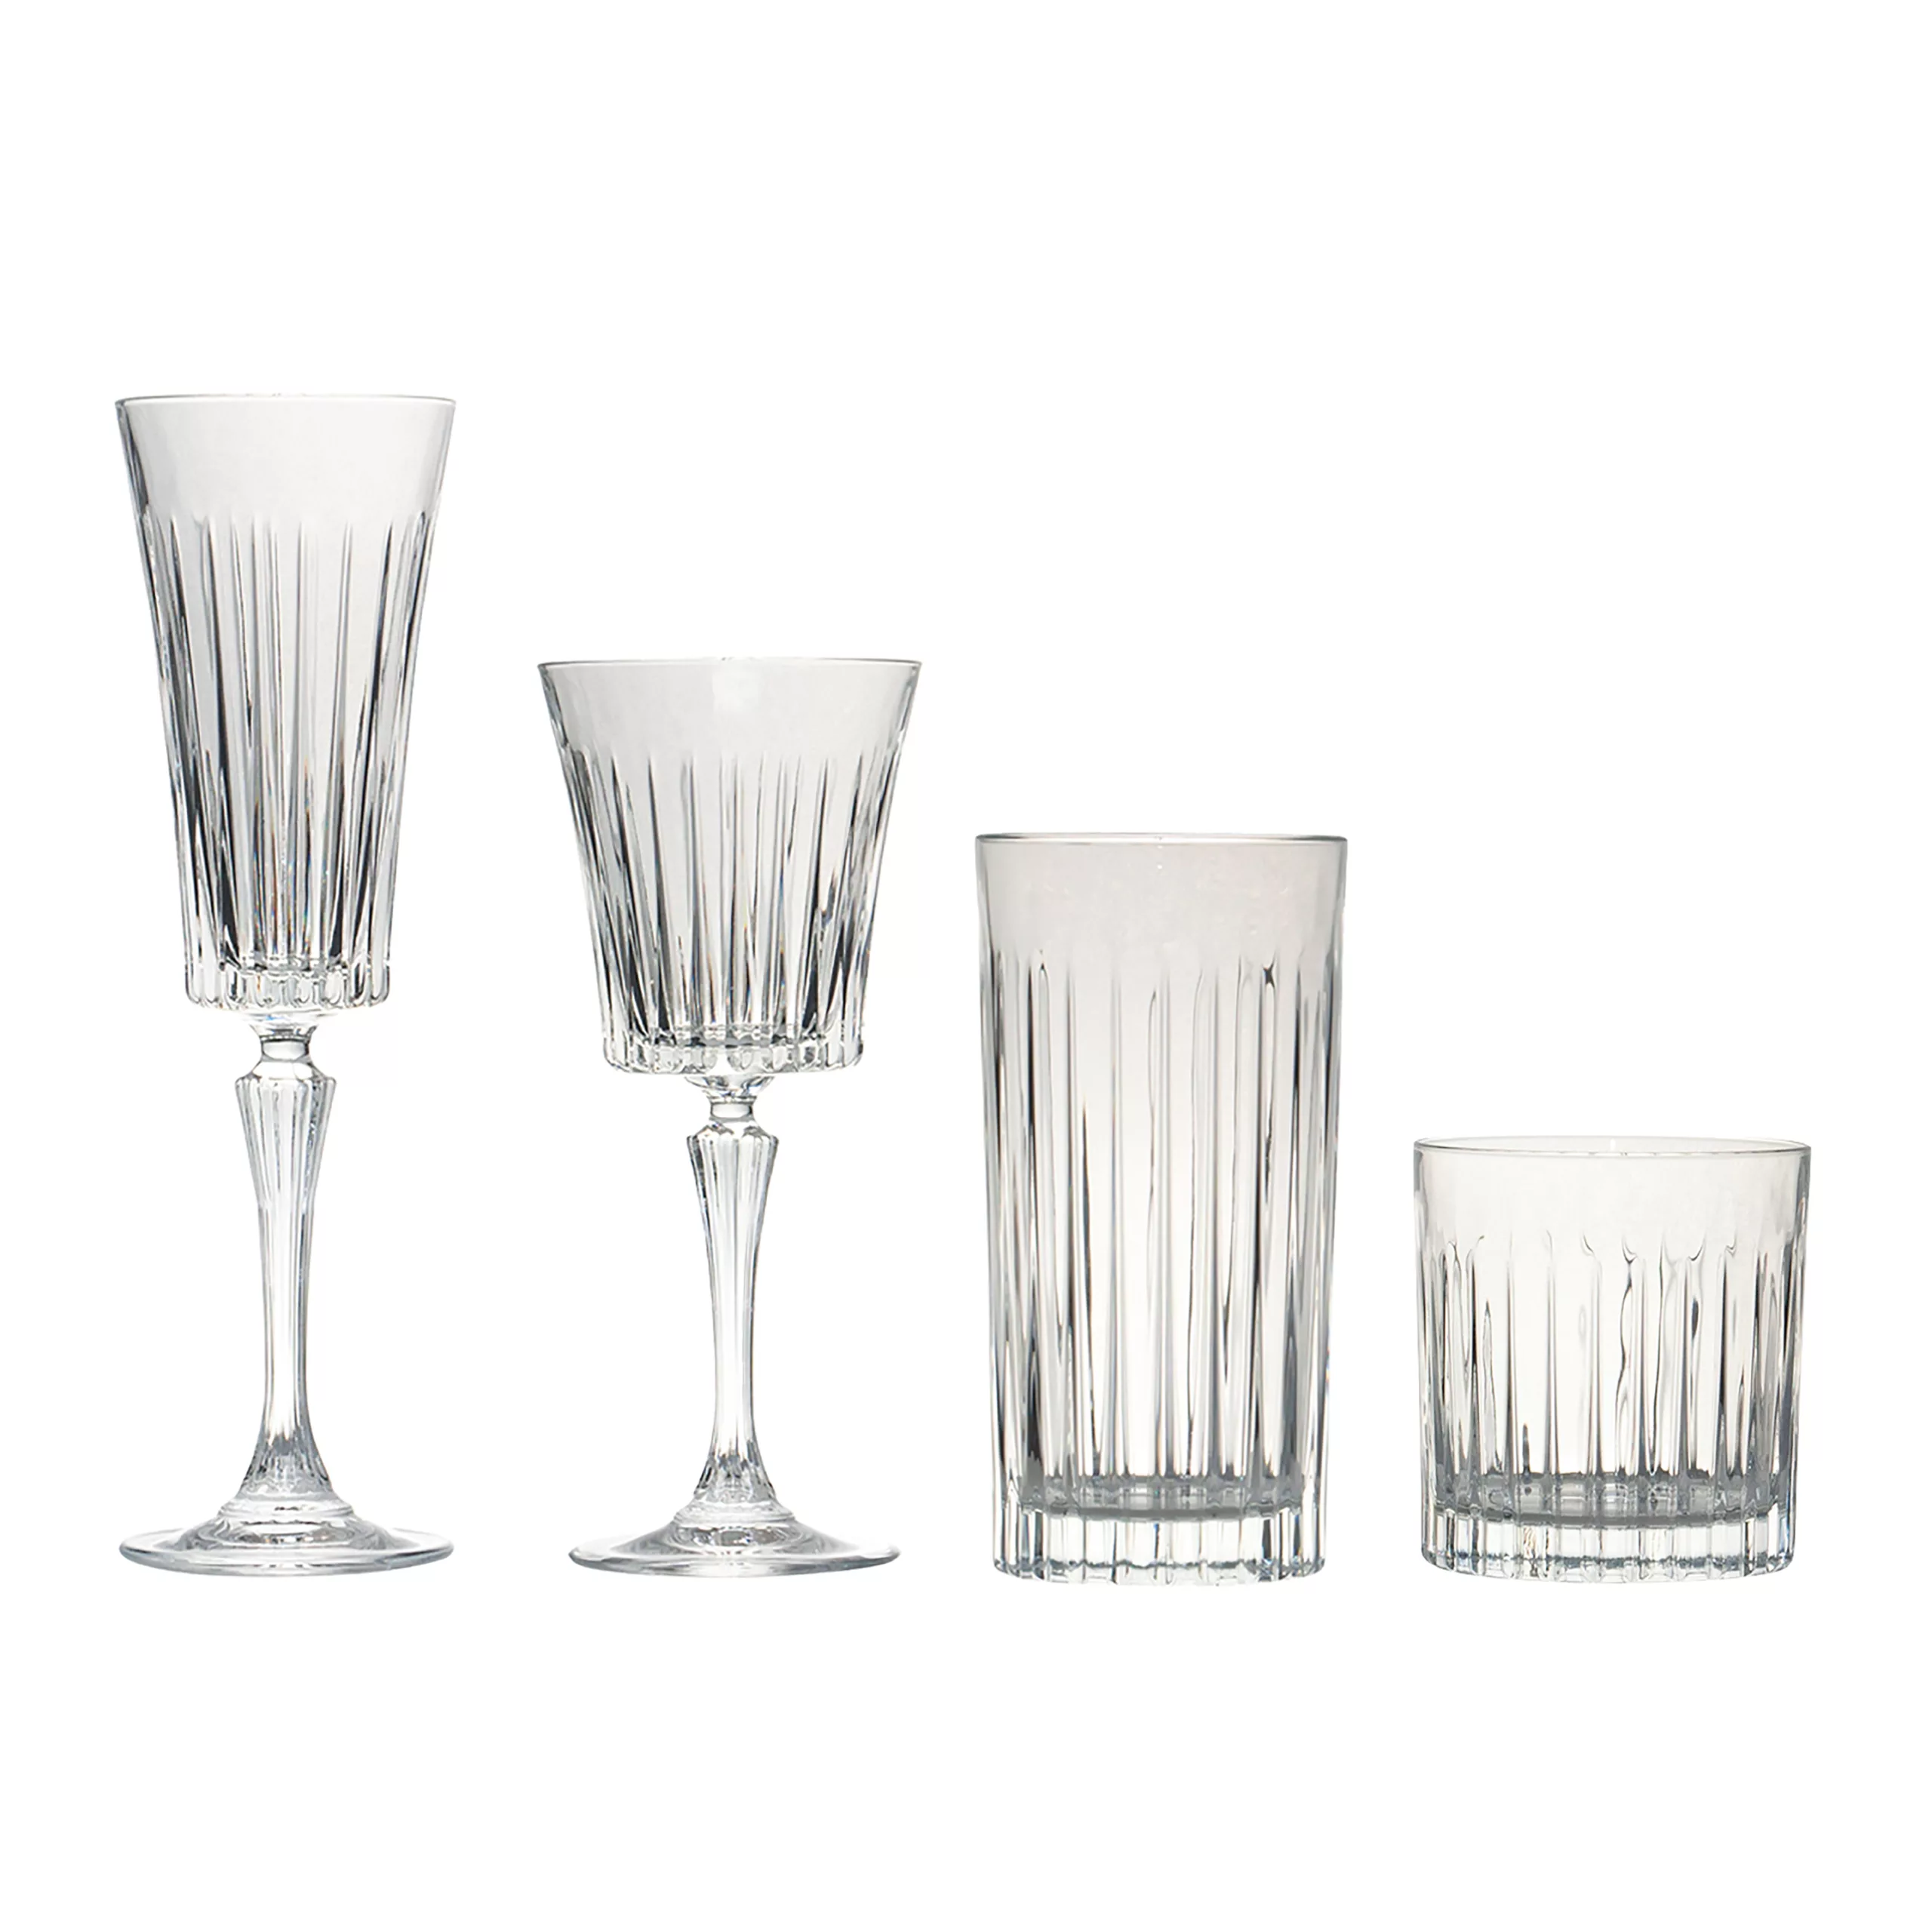 https://www.peakeventservices.com/wp-content/uploads/products//Stemware/Glassware_Timeless_set2-scaled.webp